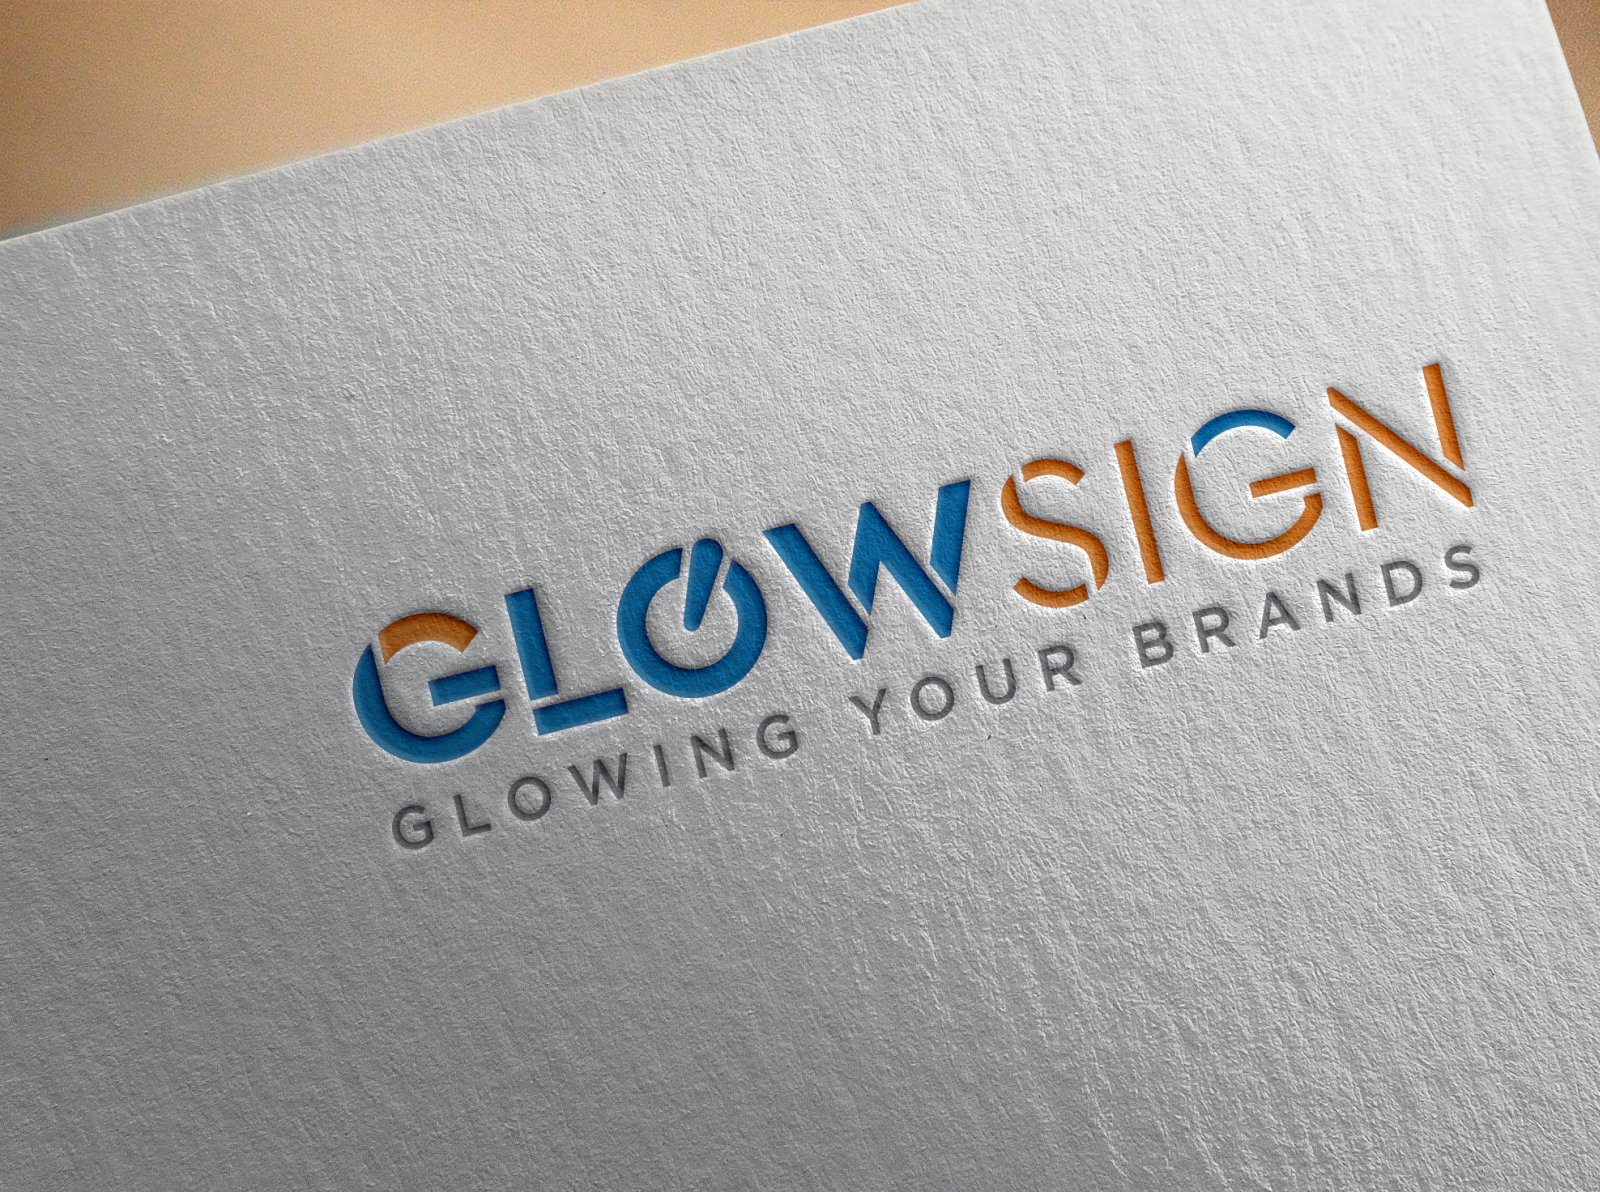 Glowsign logo by LAL kreation on Dribbble